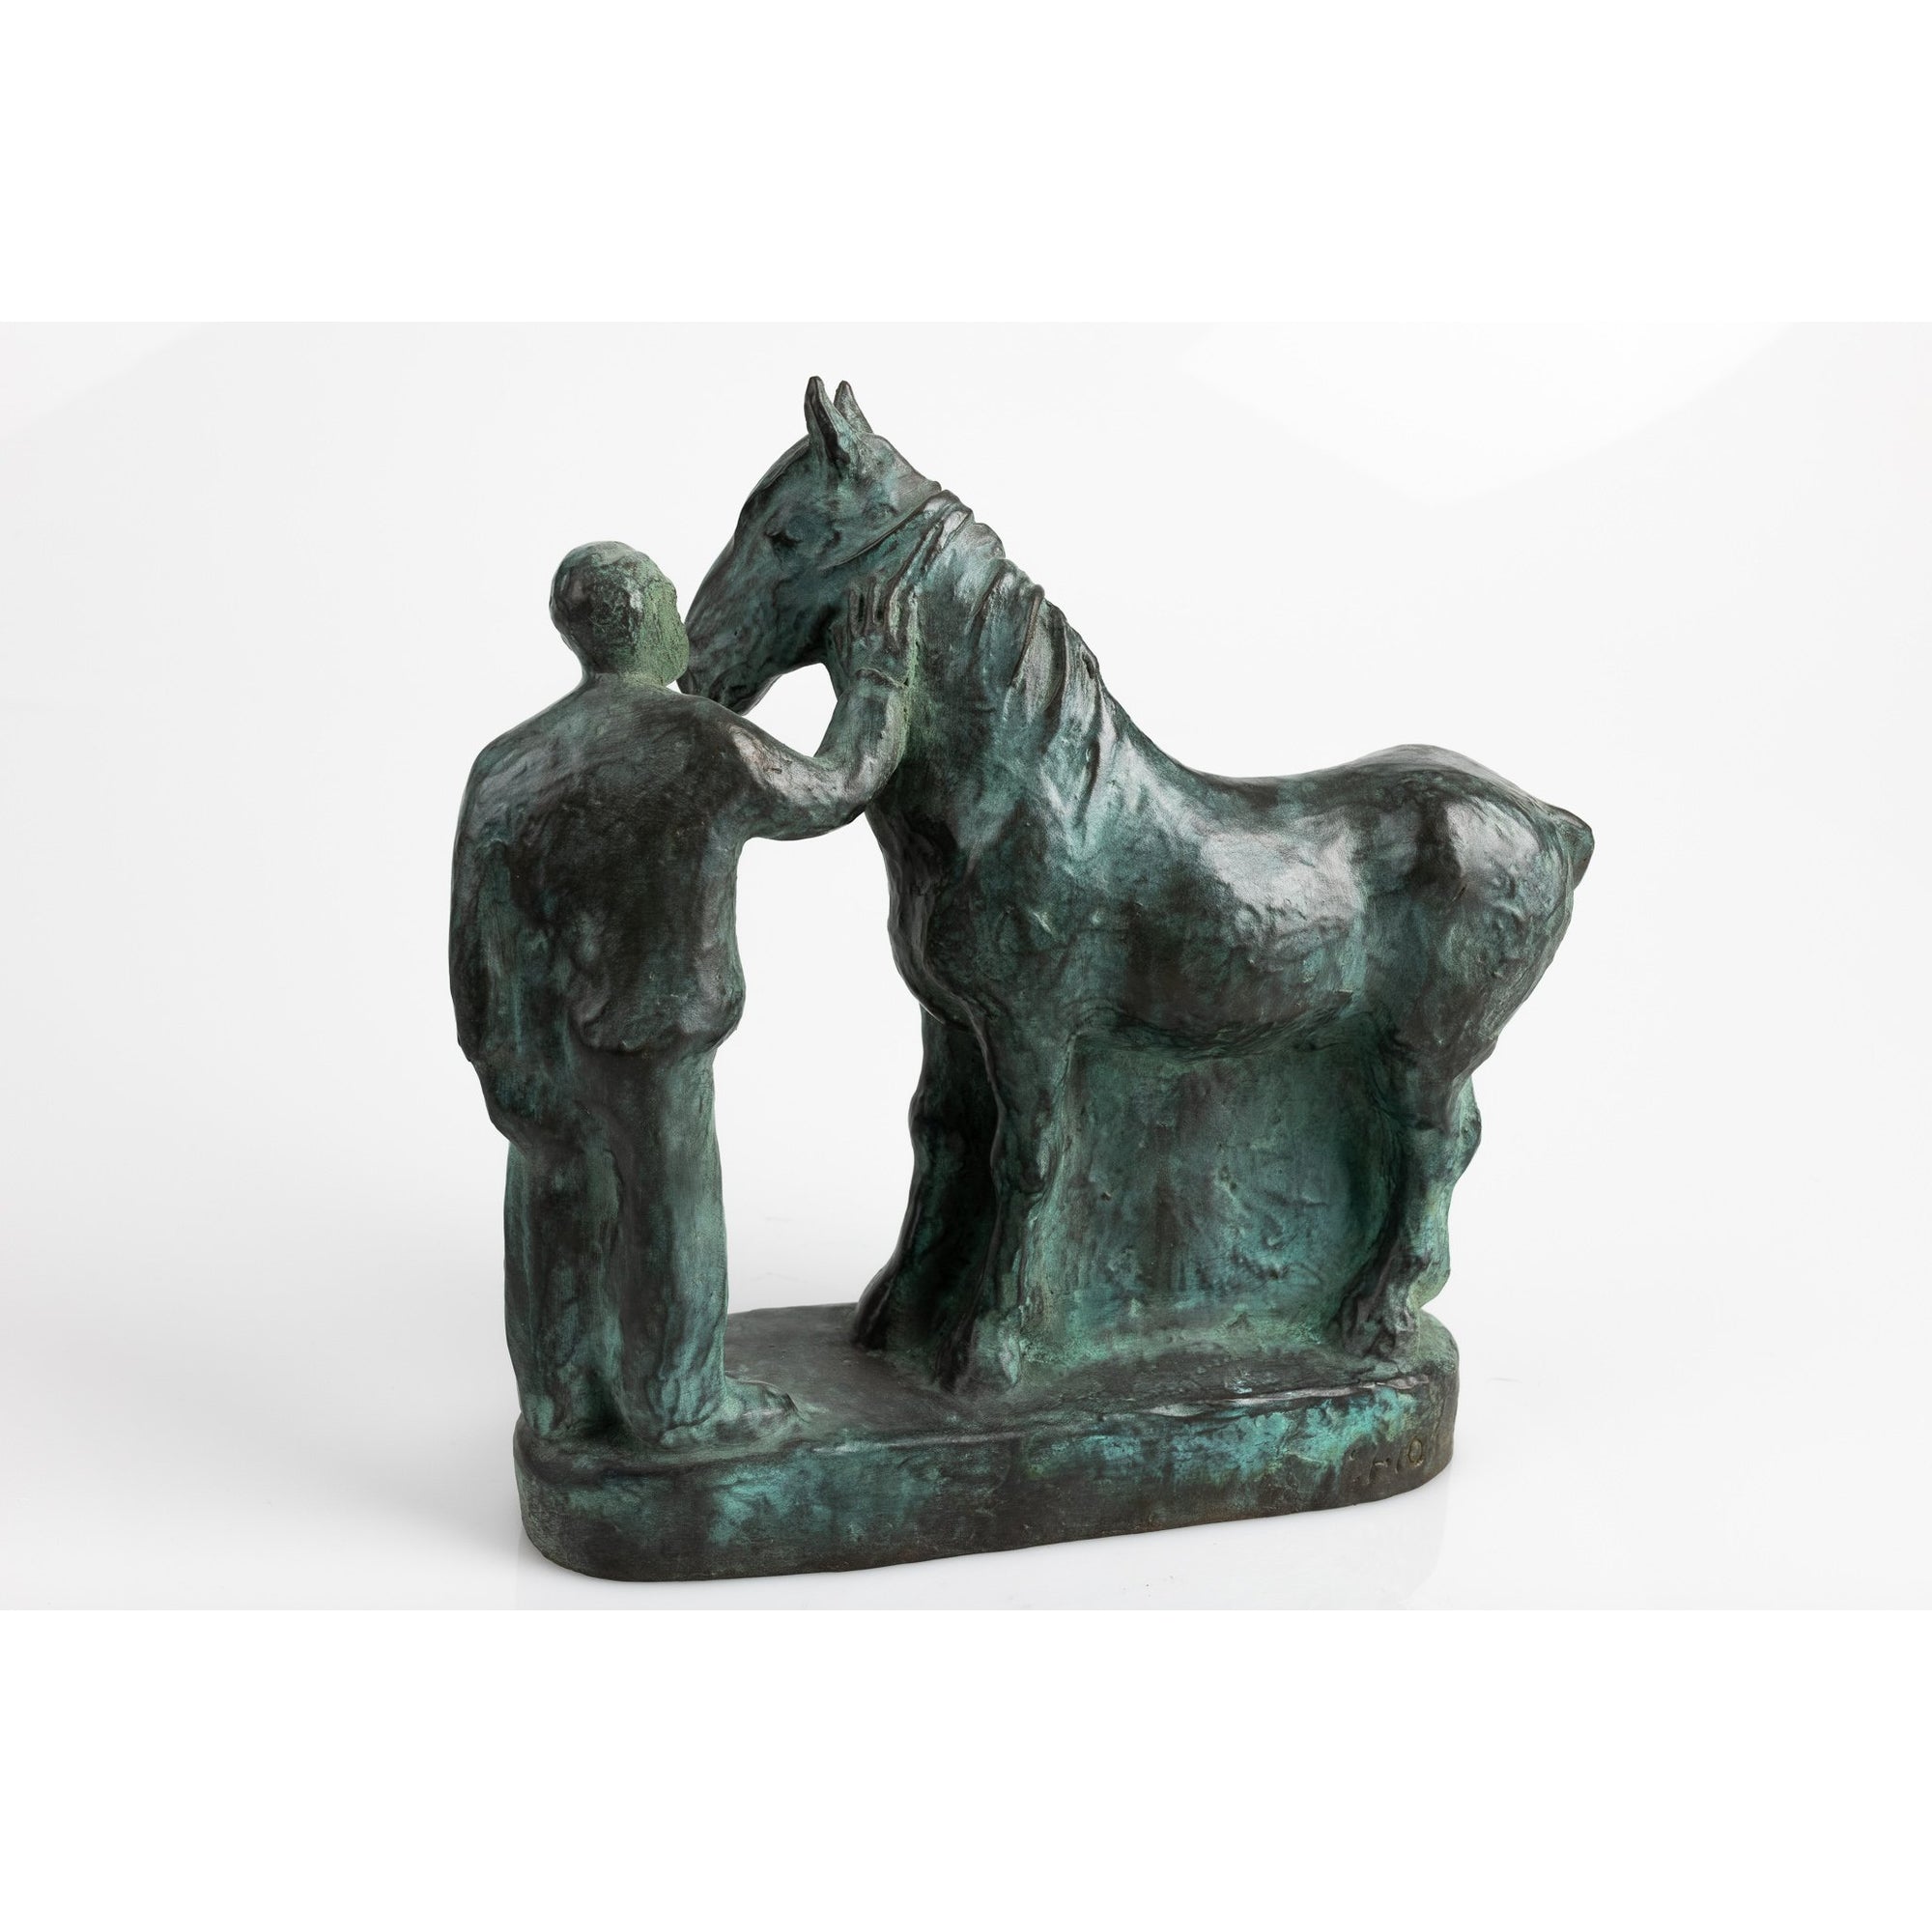 'Meeting' limited edition sculpture by Sophie Howard, available at Padstow Gallery, Cornwall